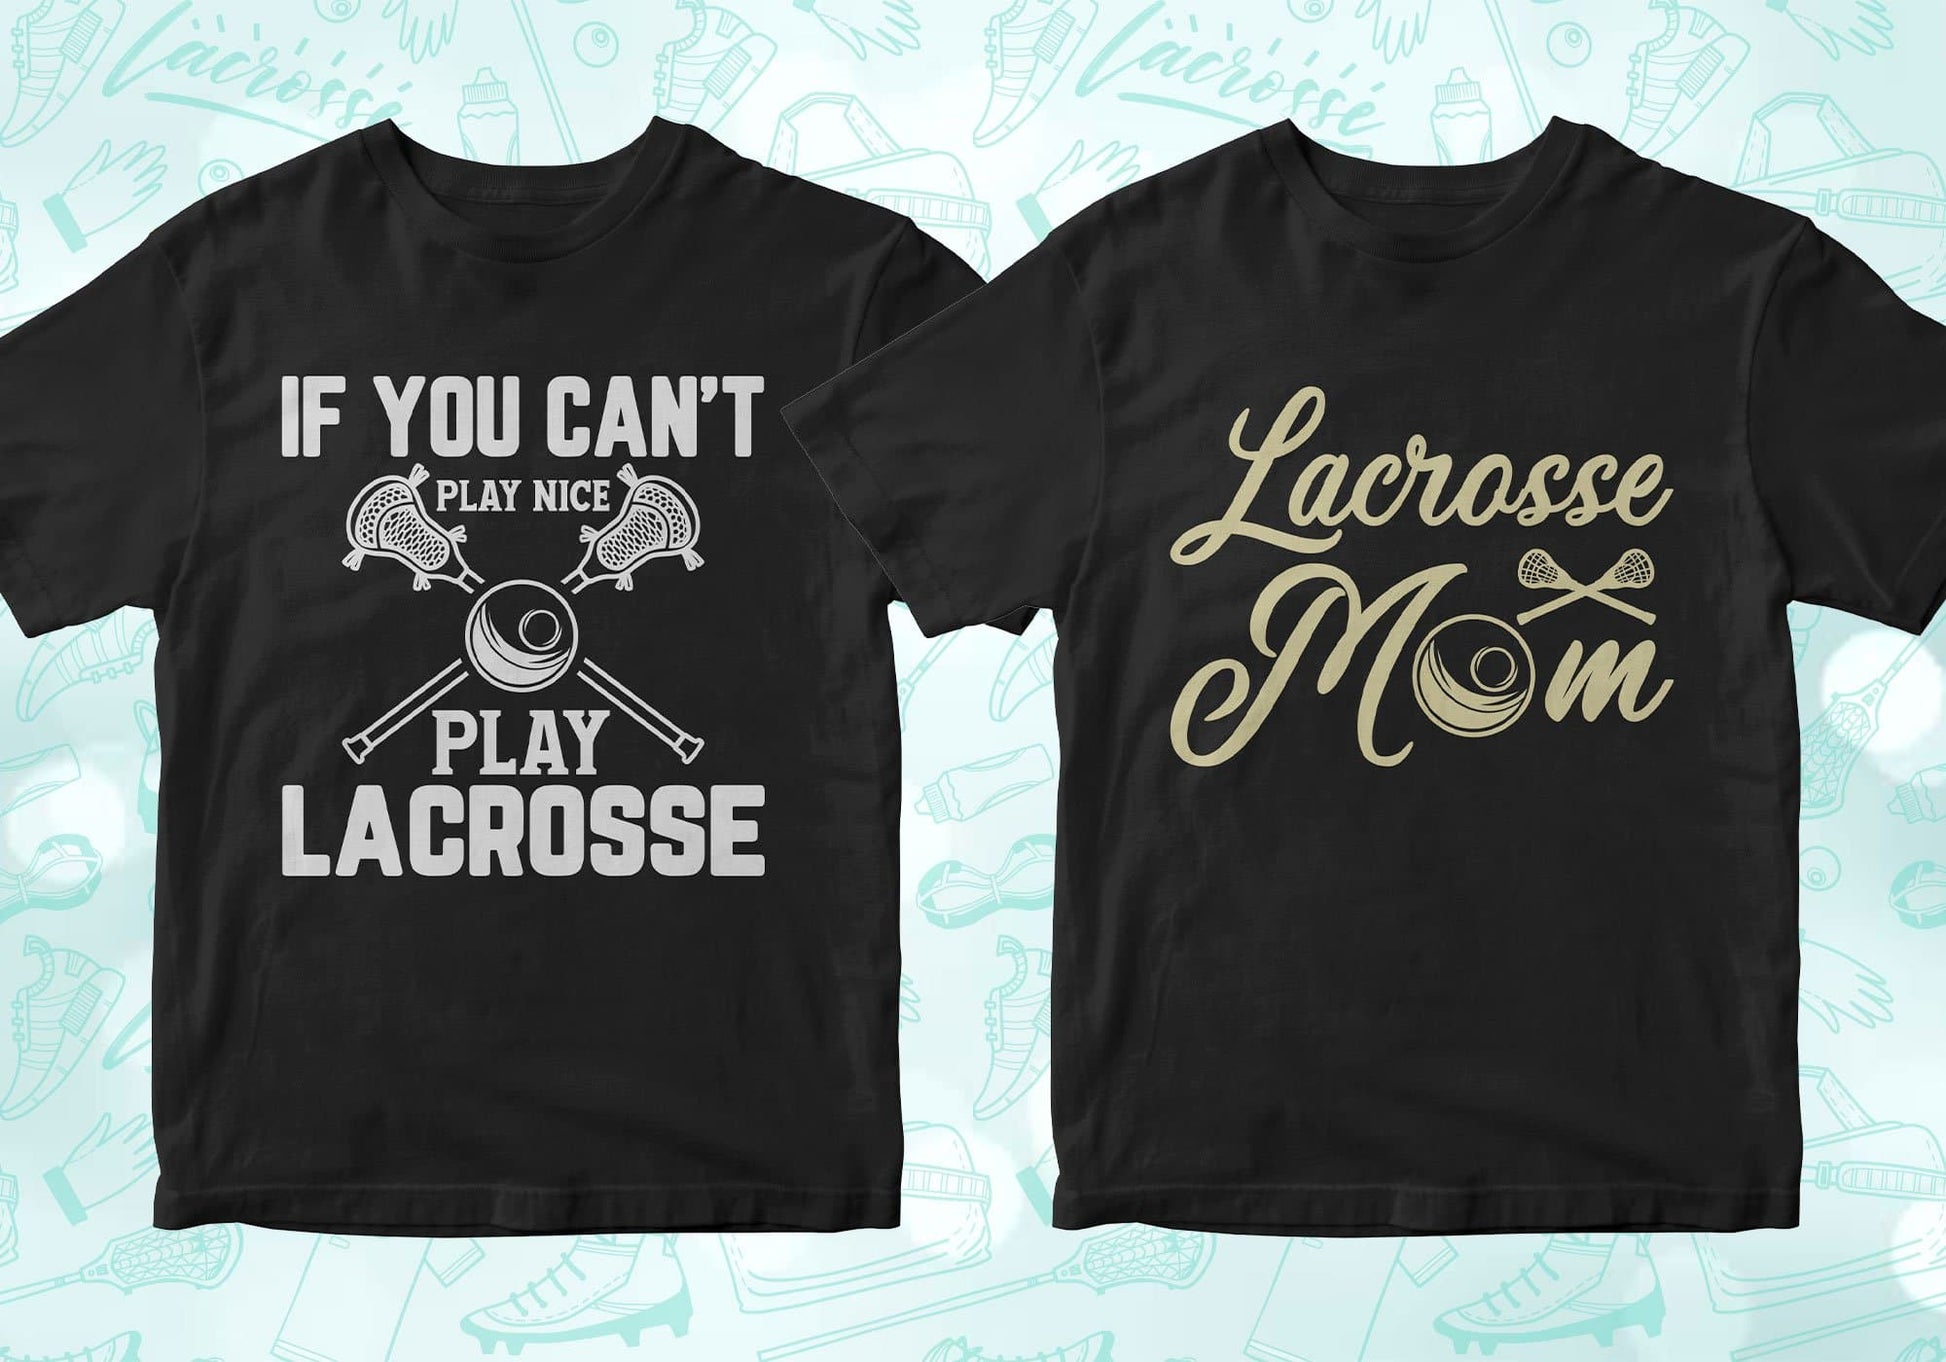 if you can't play nice play lacrosse, lacrosse mom, lacrosse shirts lacrosse tshirt lacrosse t shirts lacrosse shirt designs lacrosse graphic